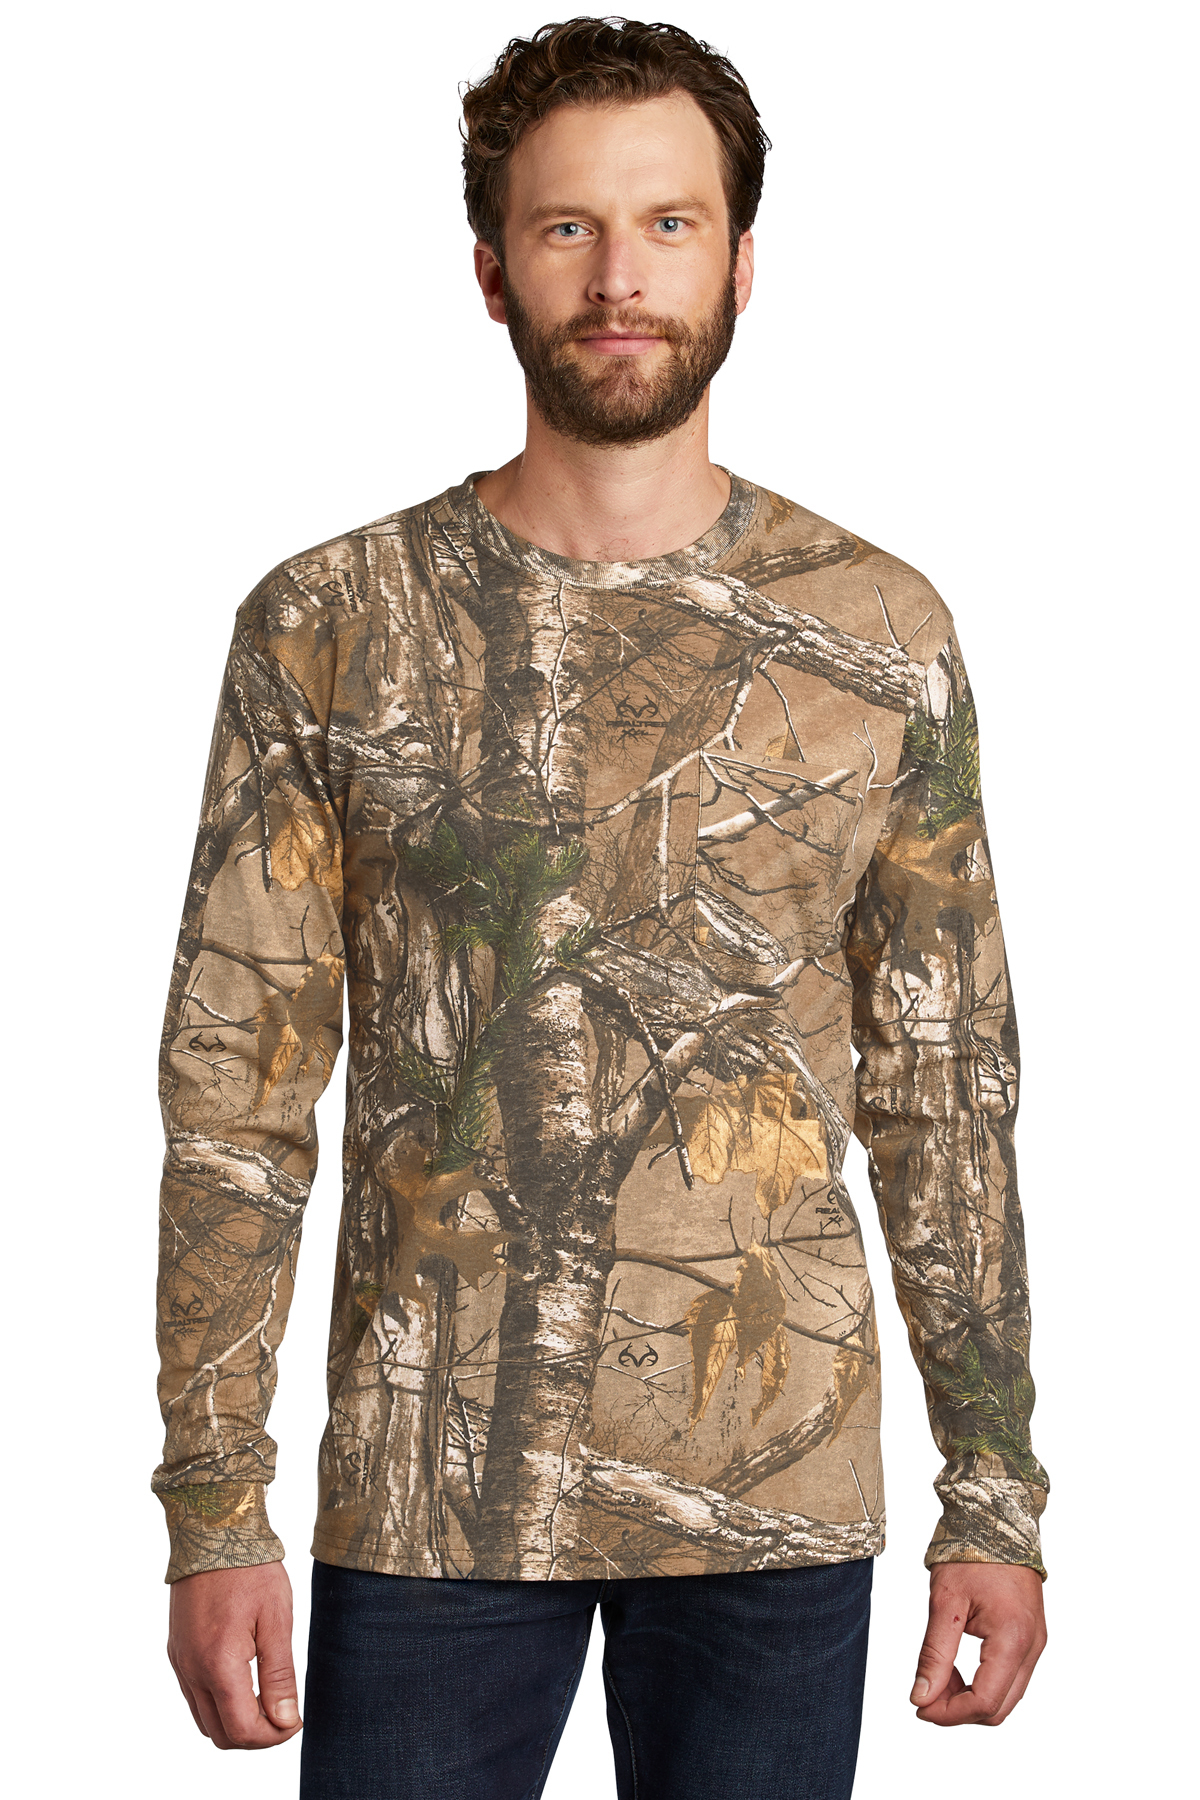 Russell Outdoors Realtree Long Sleeve Explorer 100% Cotton T-Shirt